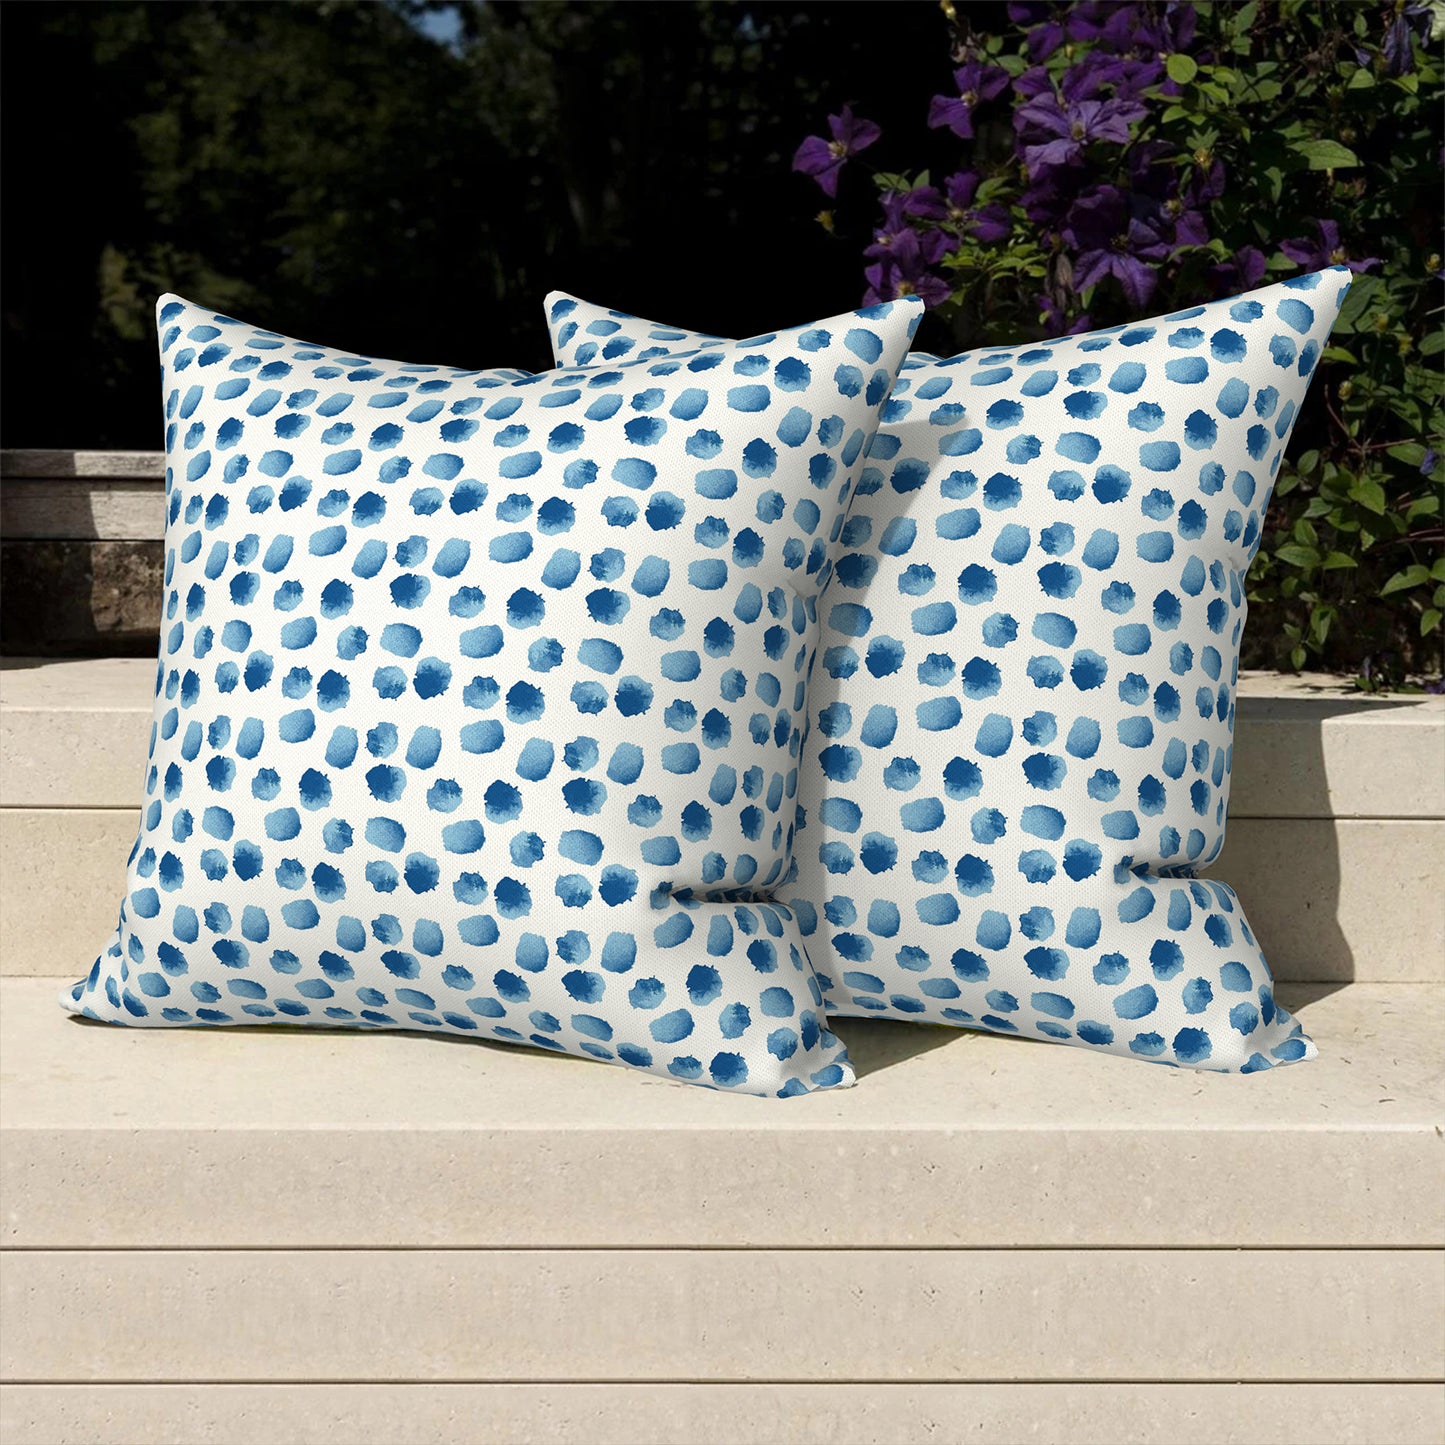 Melody Elephant Outdoor Throw Pillows with Inners, All Weather patio pillows set of 2, Square pillows Decorative for  home garden furniture, 20x20 Inch, Brush Blue